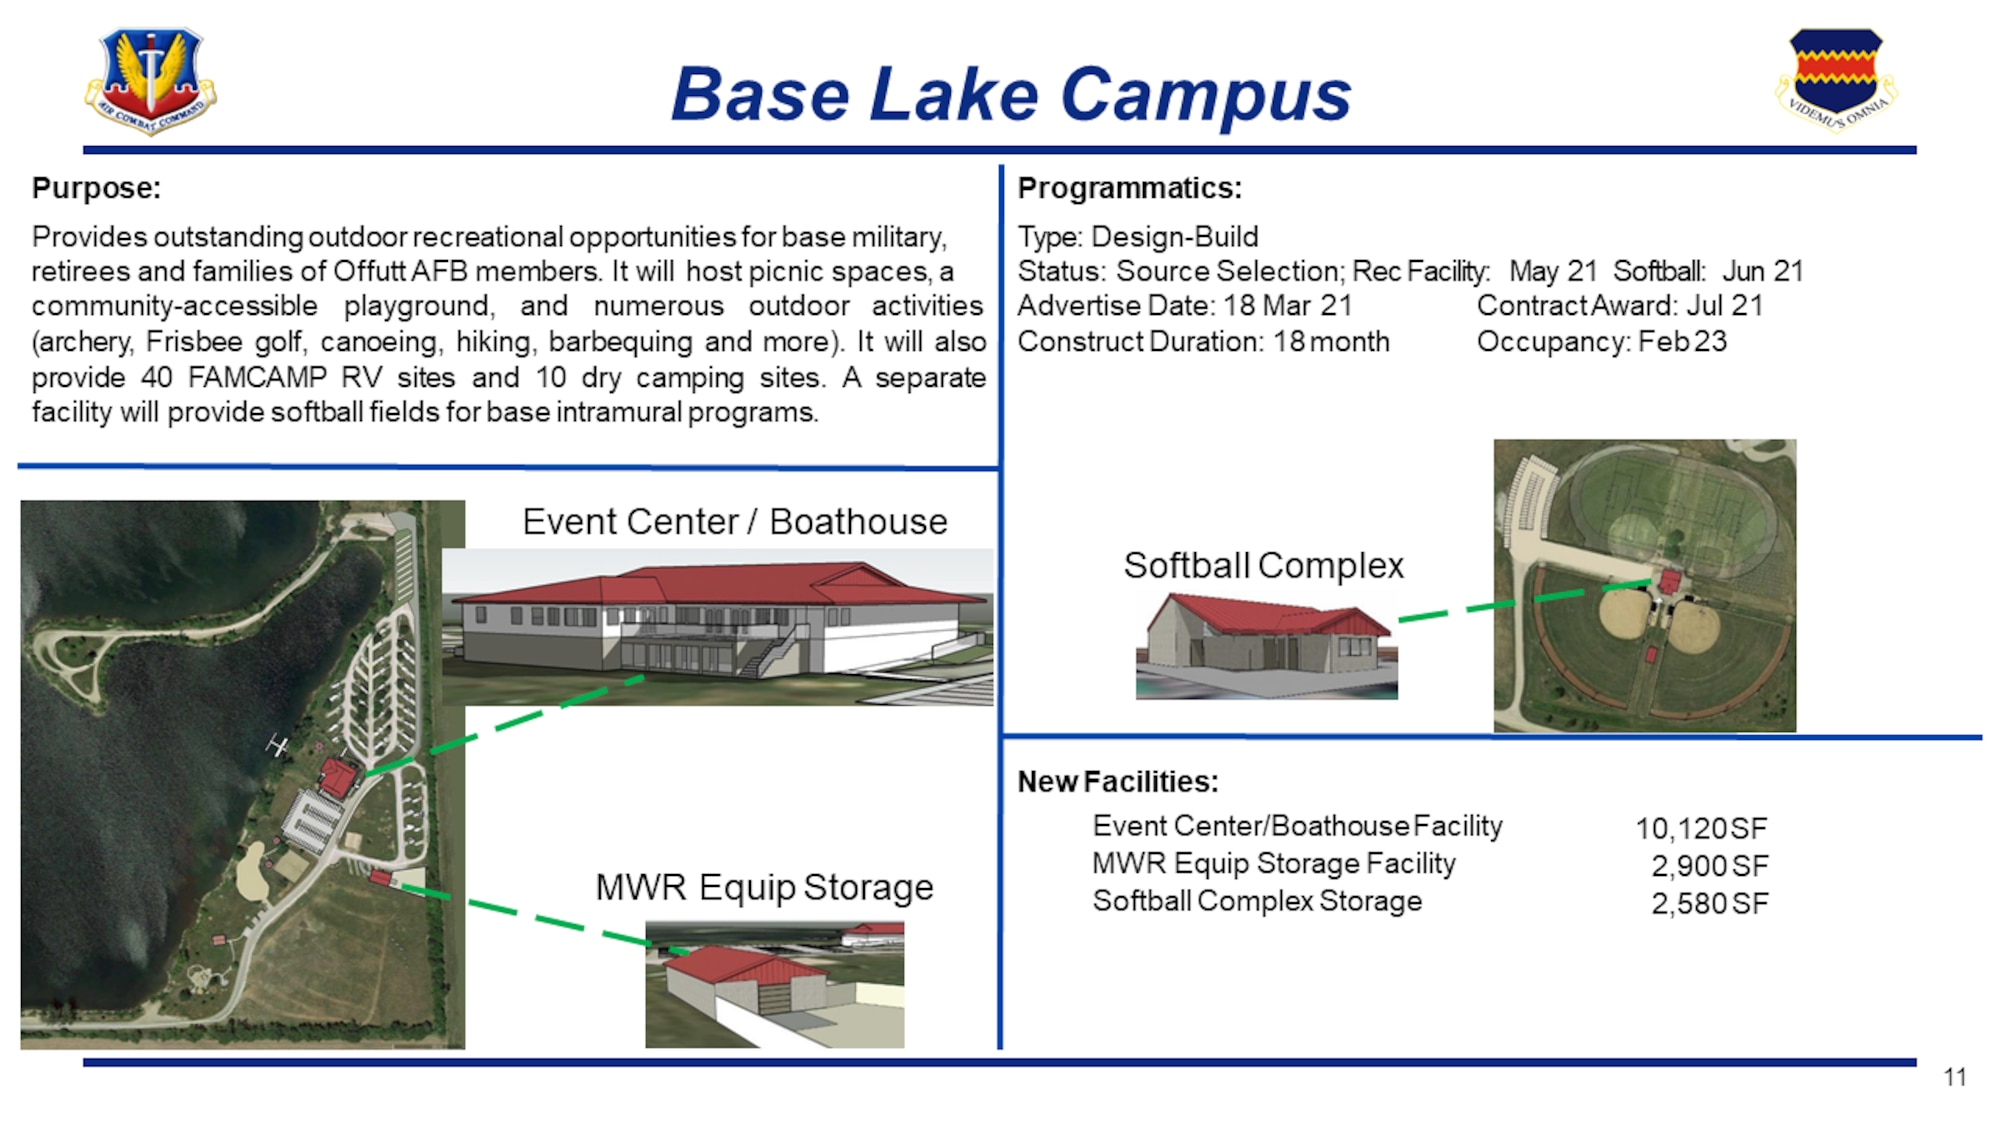 Graphic showing plans and future layout for Base Lake Campus flood reconstruction. Shows layout for boathouse, event center and a softball complex.